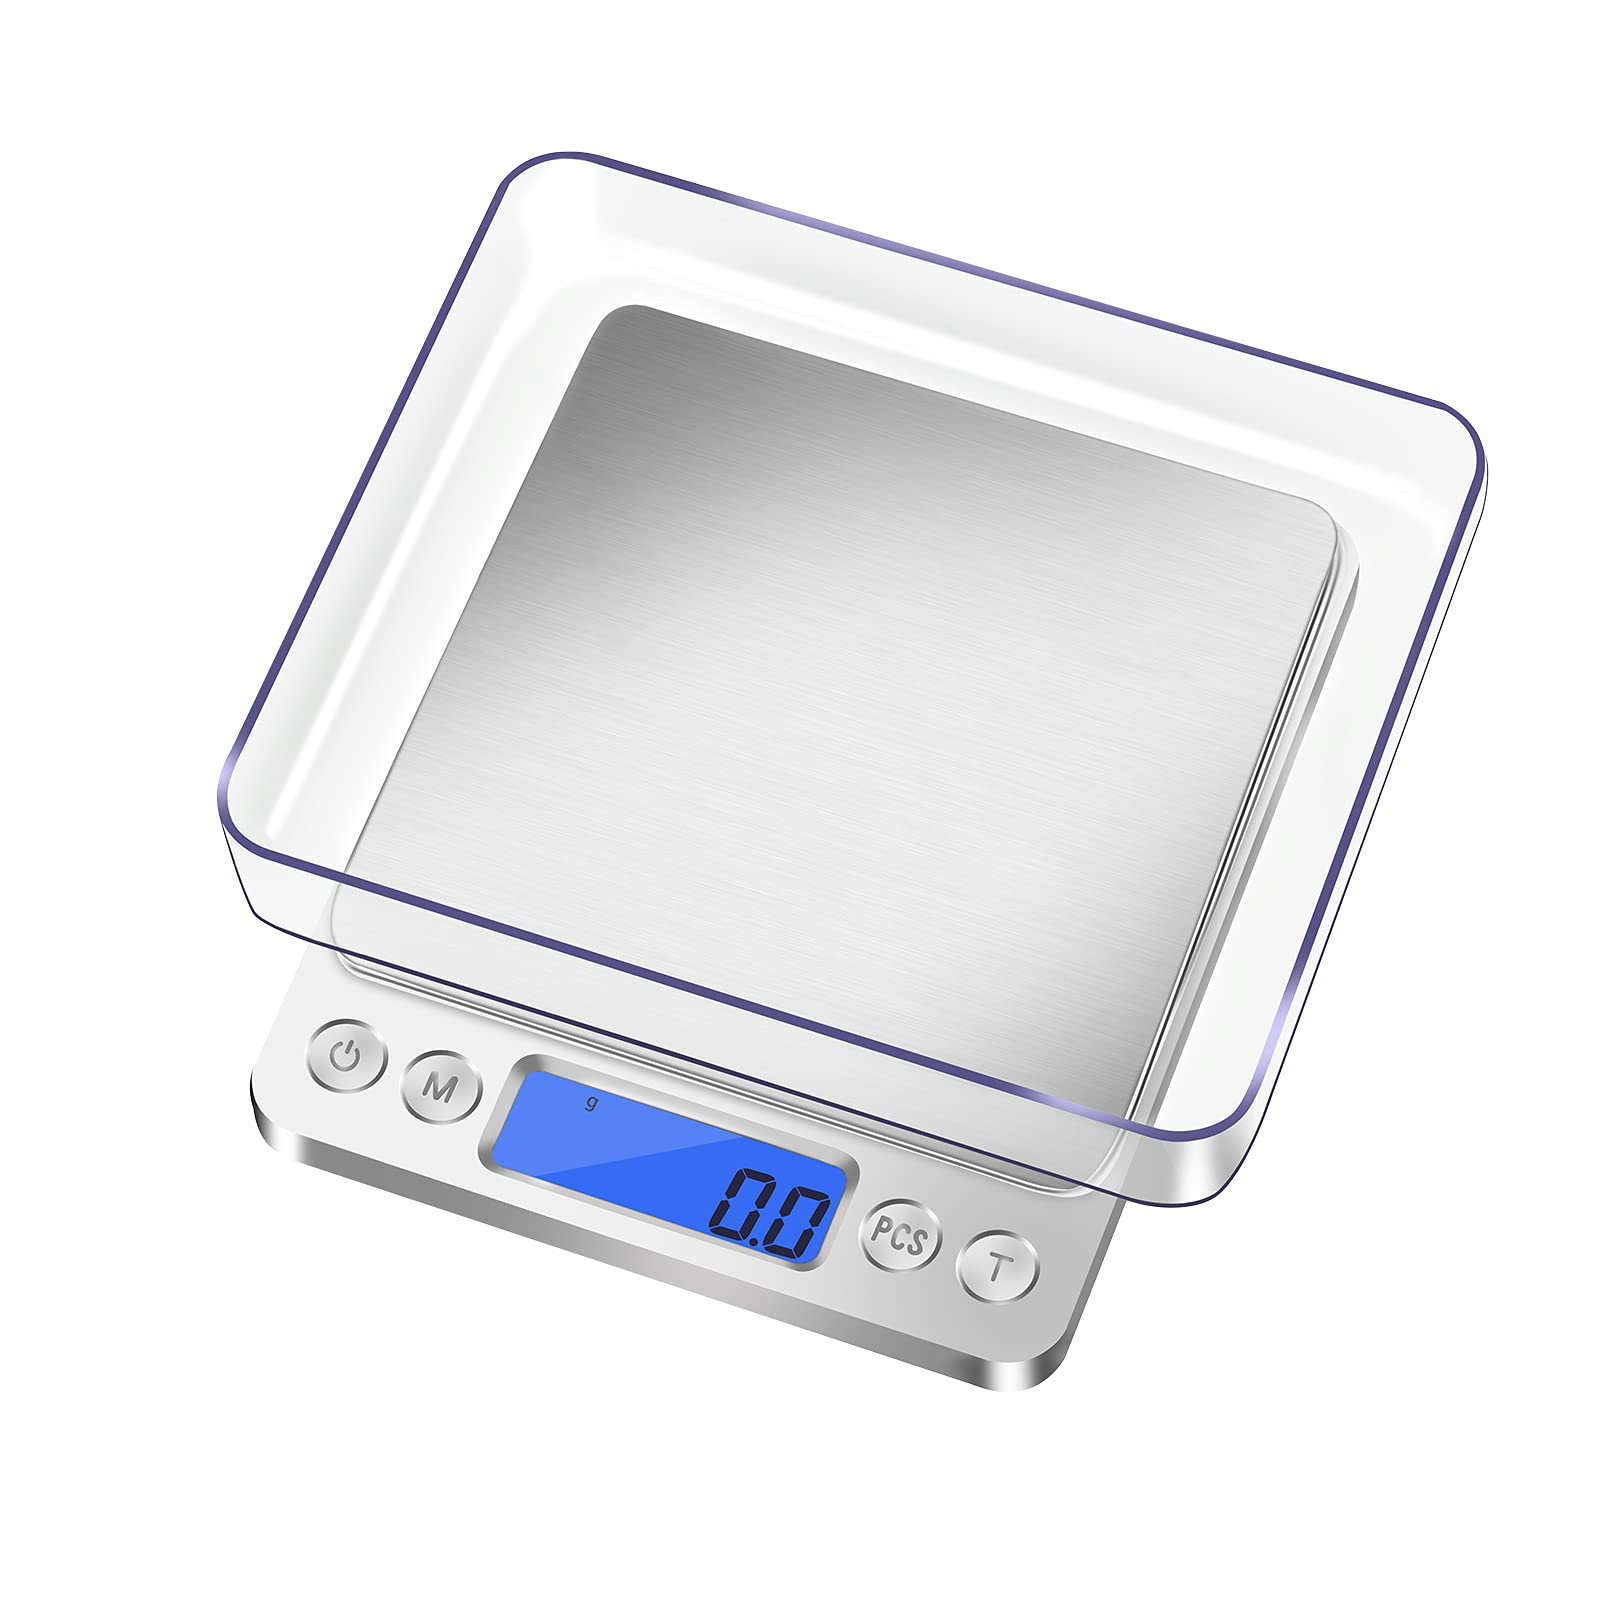 Kitchen Scale Digital Electronic Food Weighing Scale Measure Accurate 3000g*.01g 